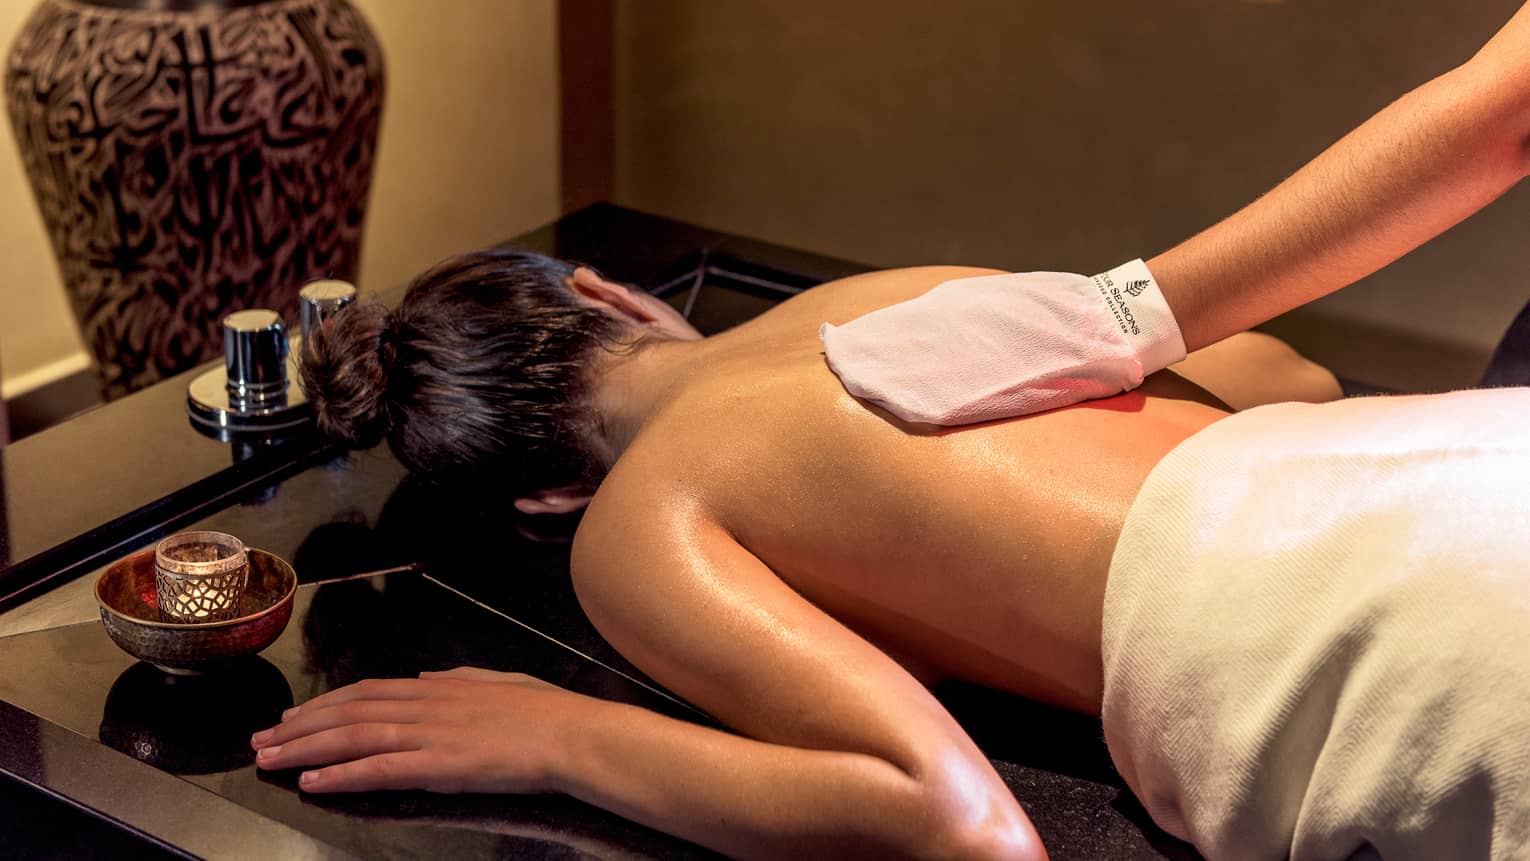 Woman lies face-down on spa table while hand with white mitten massages her back